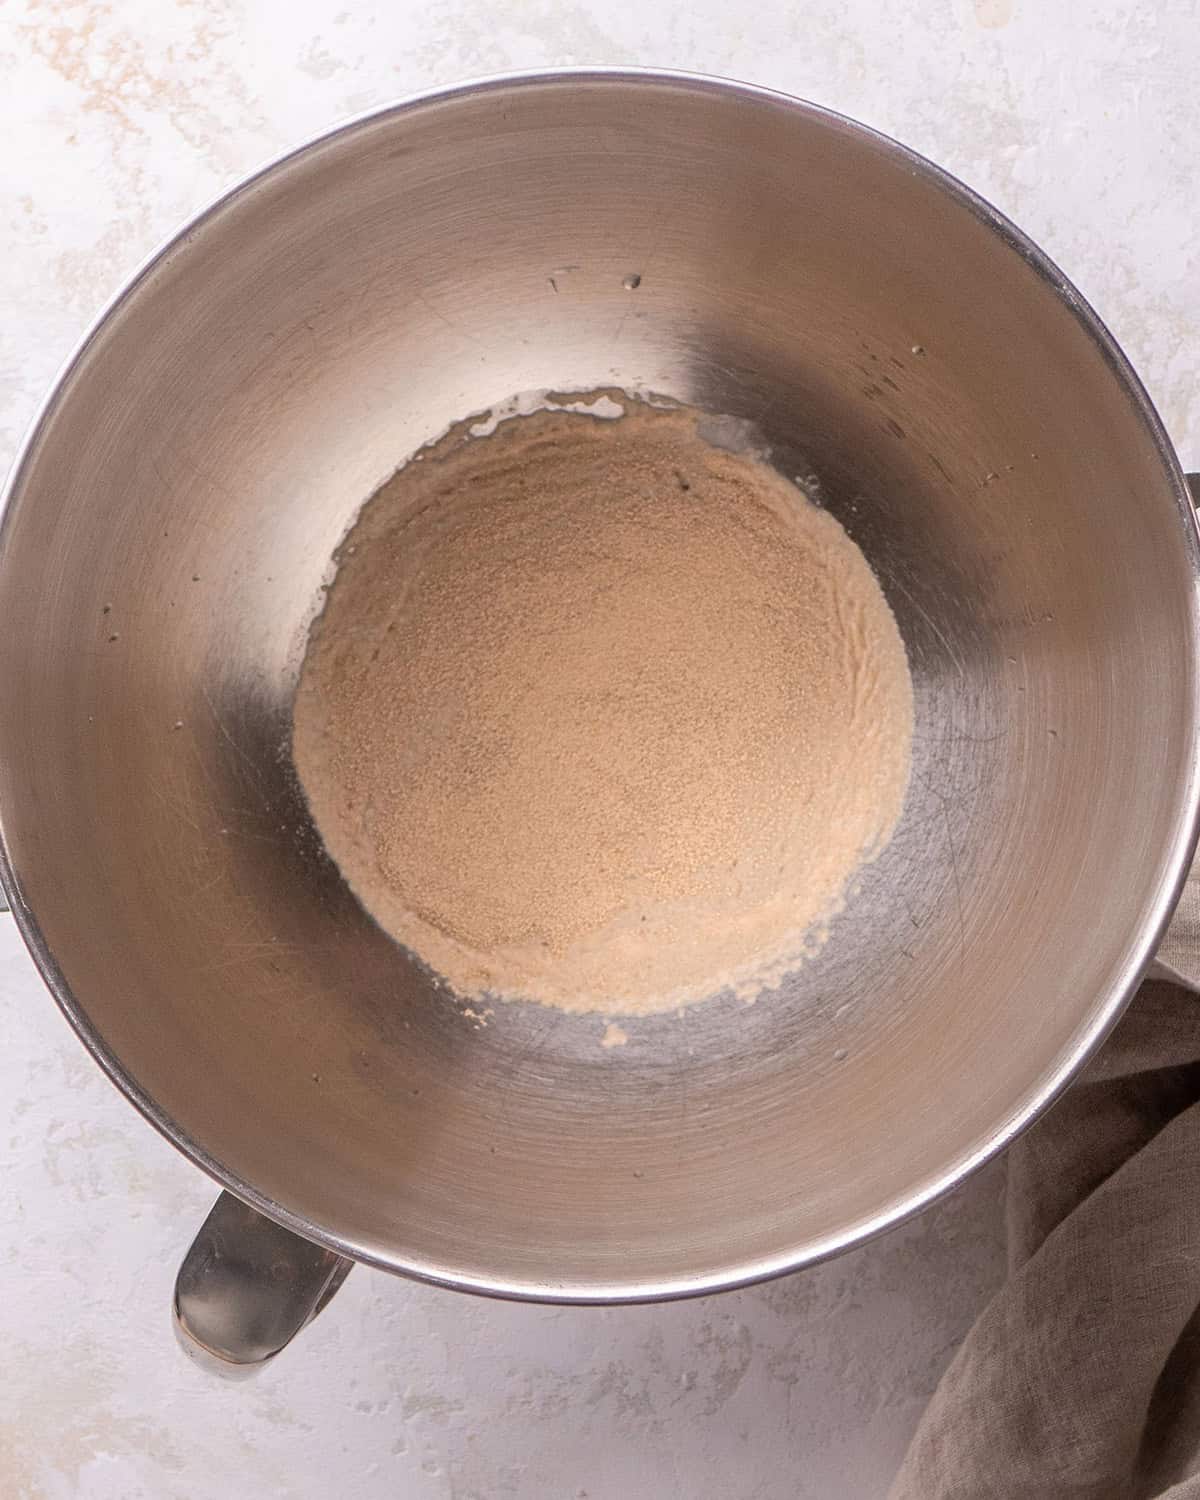 How to Make Honey Wheat Bread - yeast proofing before foaming